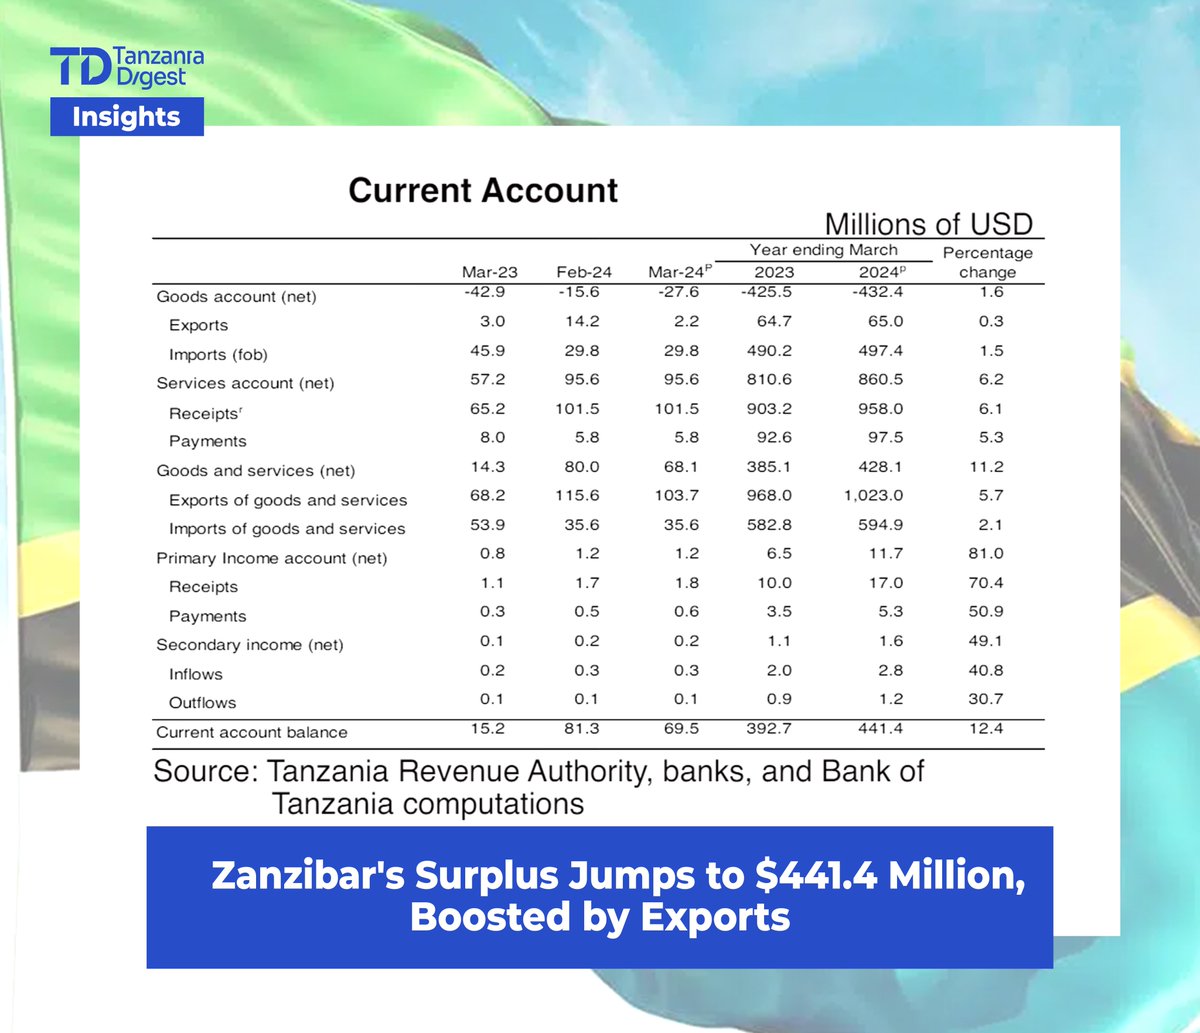 Zanzibar's Economy Boosted by Higher Exports, Surplus Reaches $441.4 Million Zanzibar's current account surplus increased to USD 441.4 million by the end of March 2024, up from USD 392.7 million in 2023. This growth was mainly due to higher exports of goods and services.